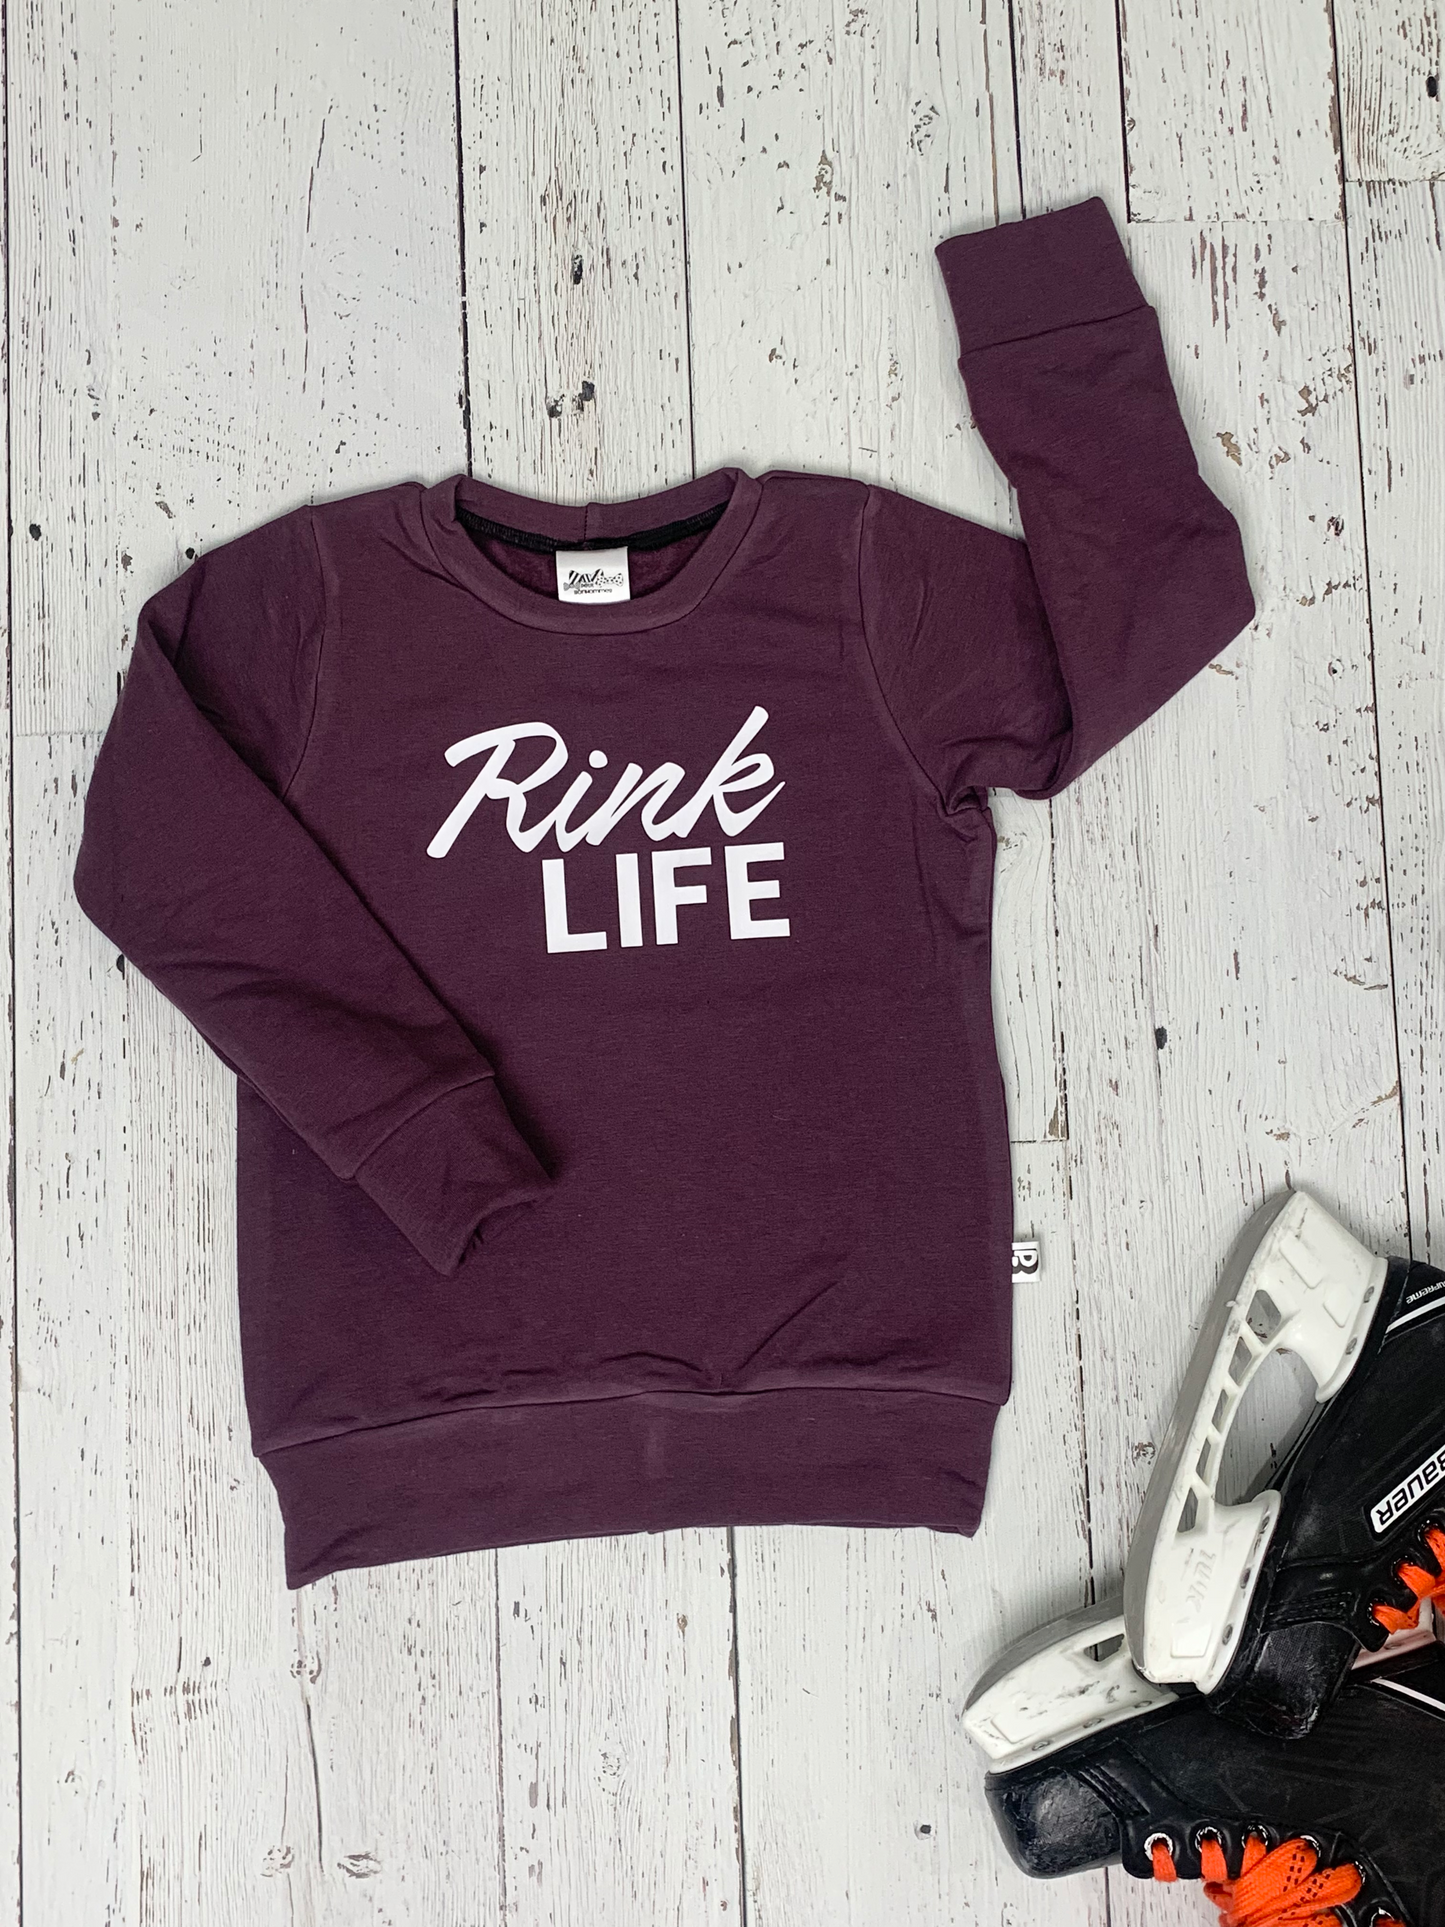 Bamboo Unisex Pullover Sweater - Rink Life